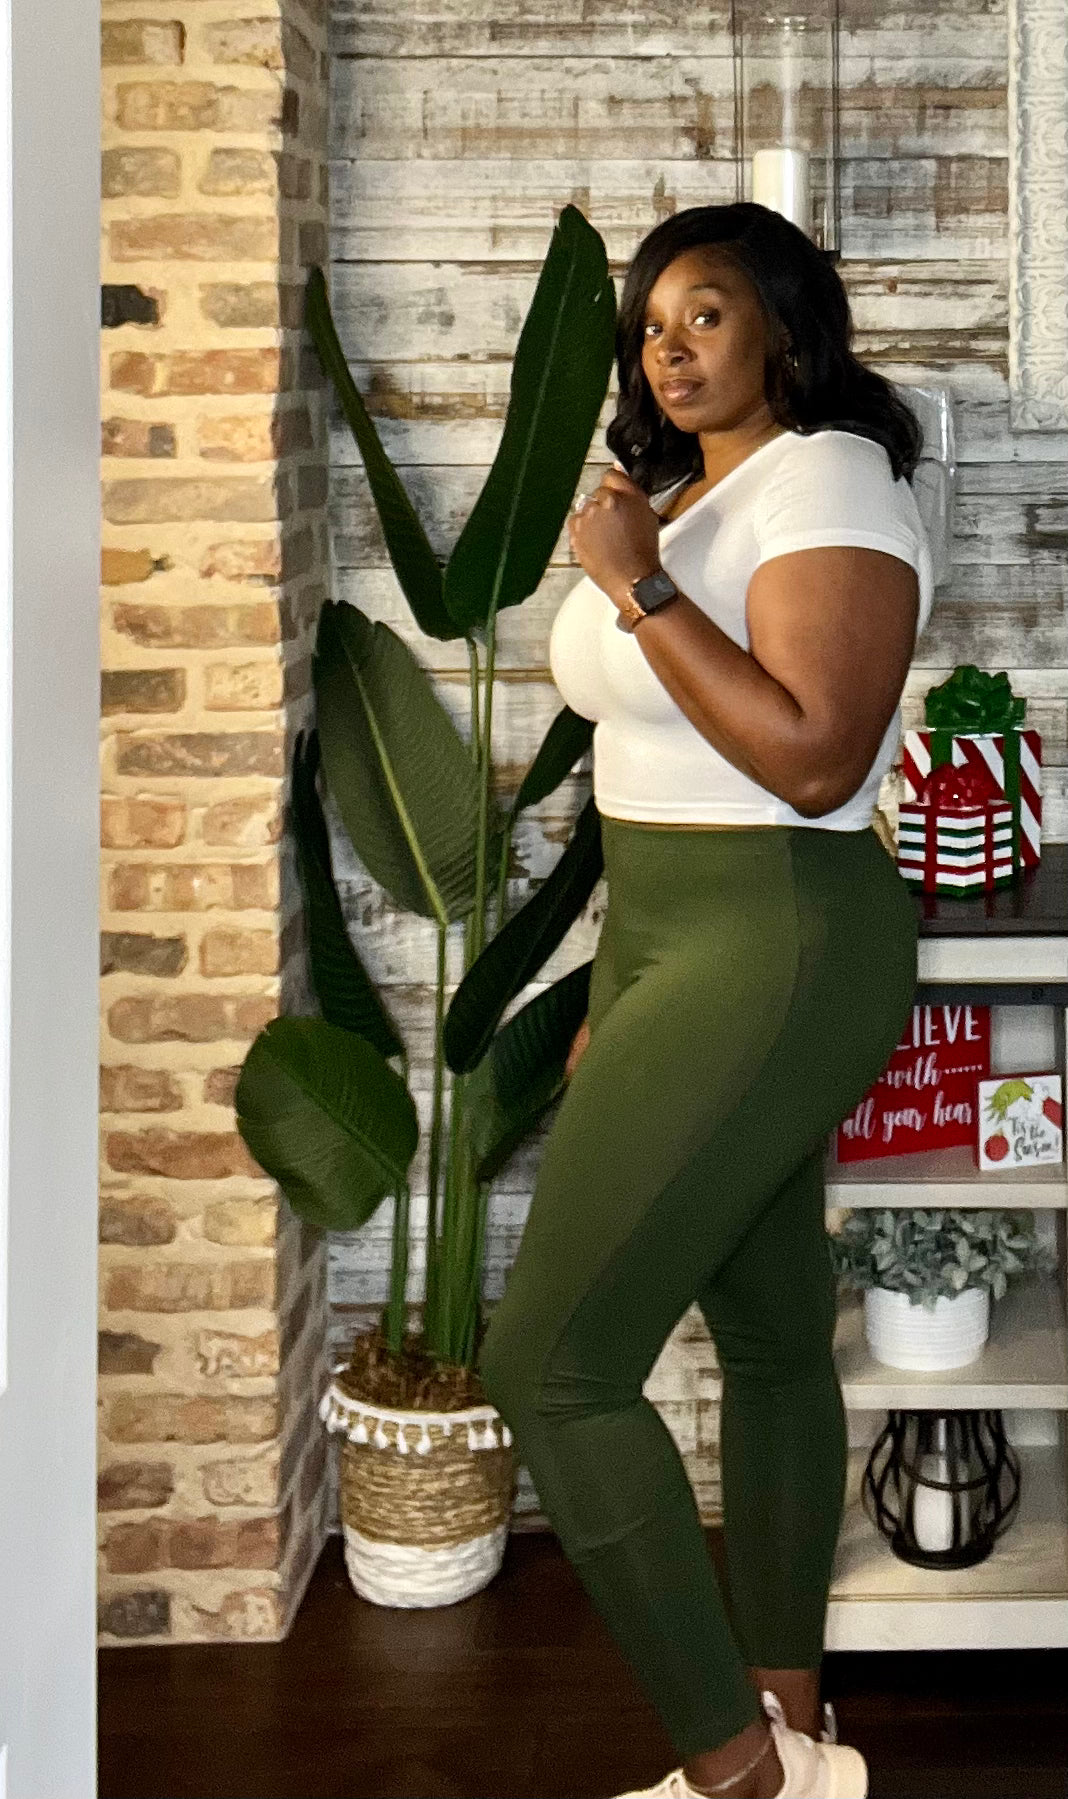 Army green tights – DiorD'LuxeBoutique